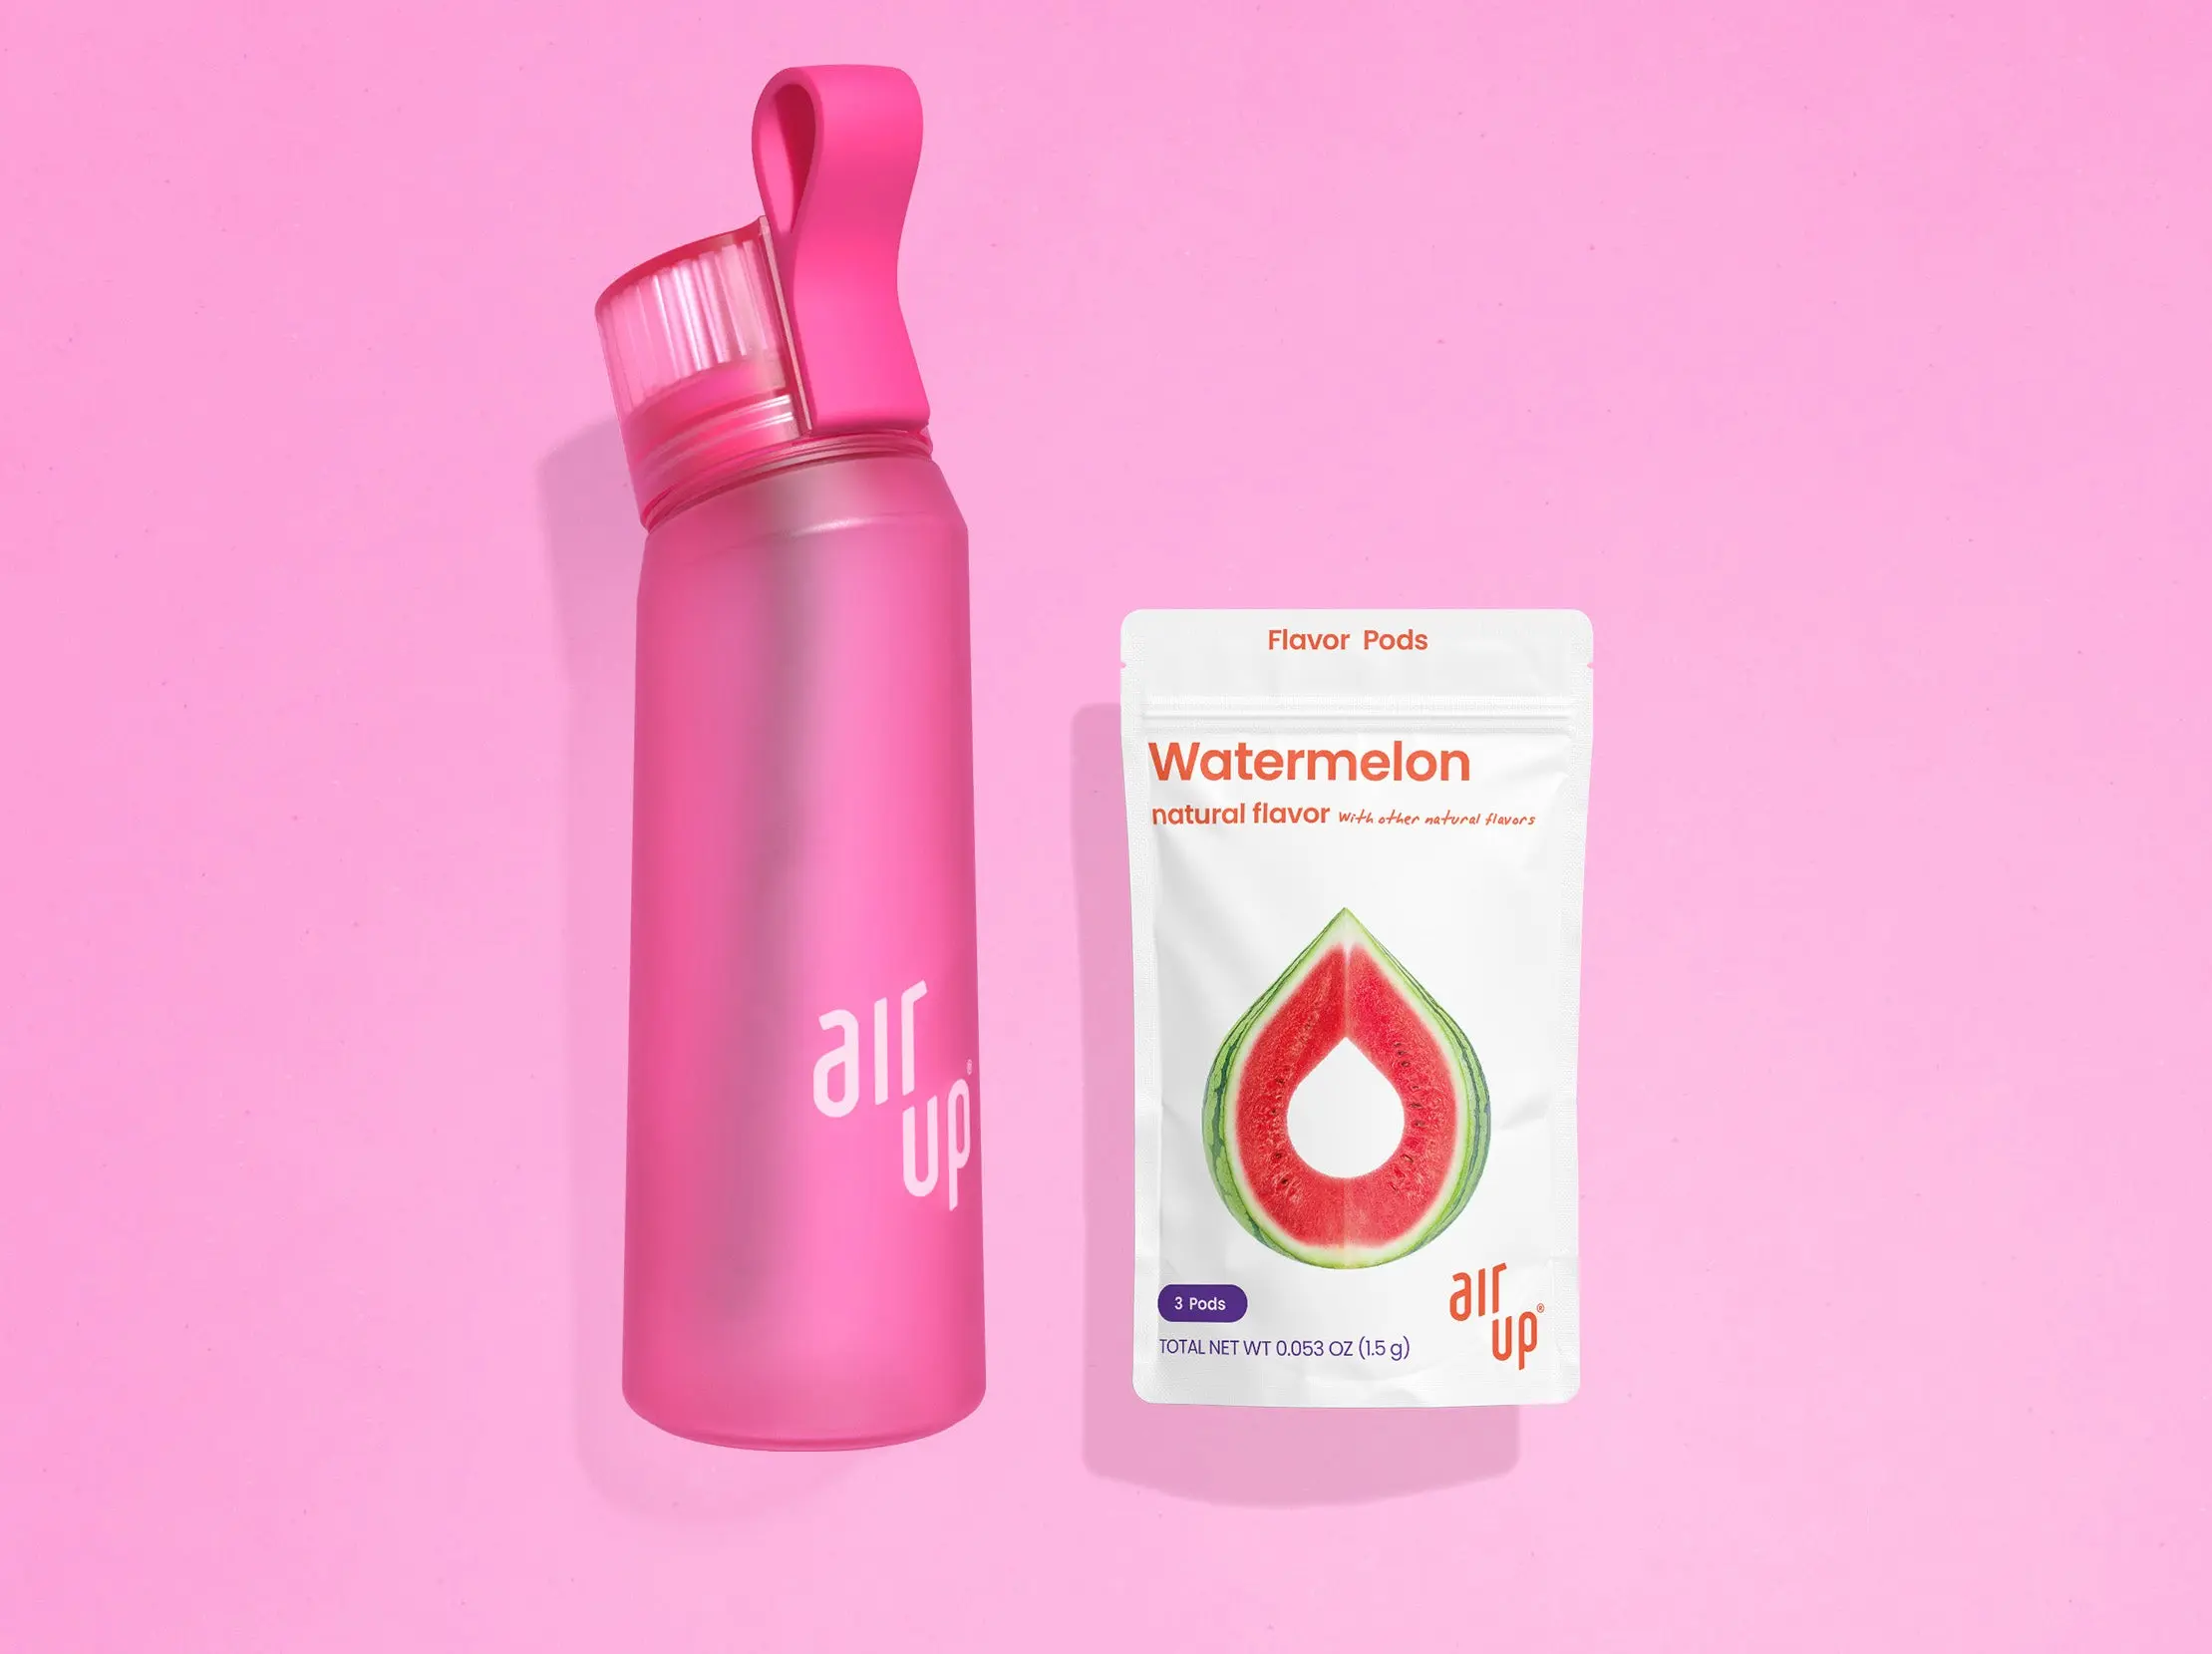 Hot Pink bottle + Watermelon pods (3-pack)